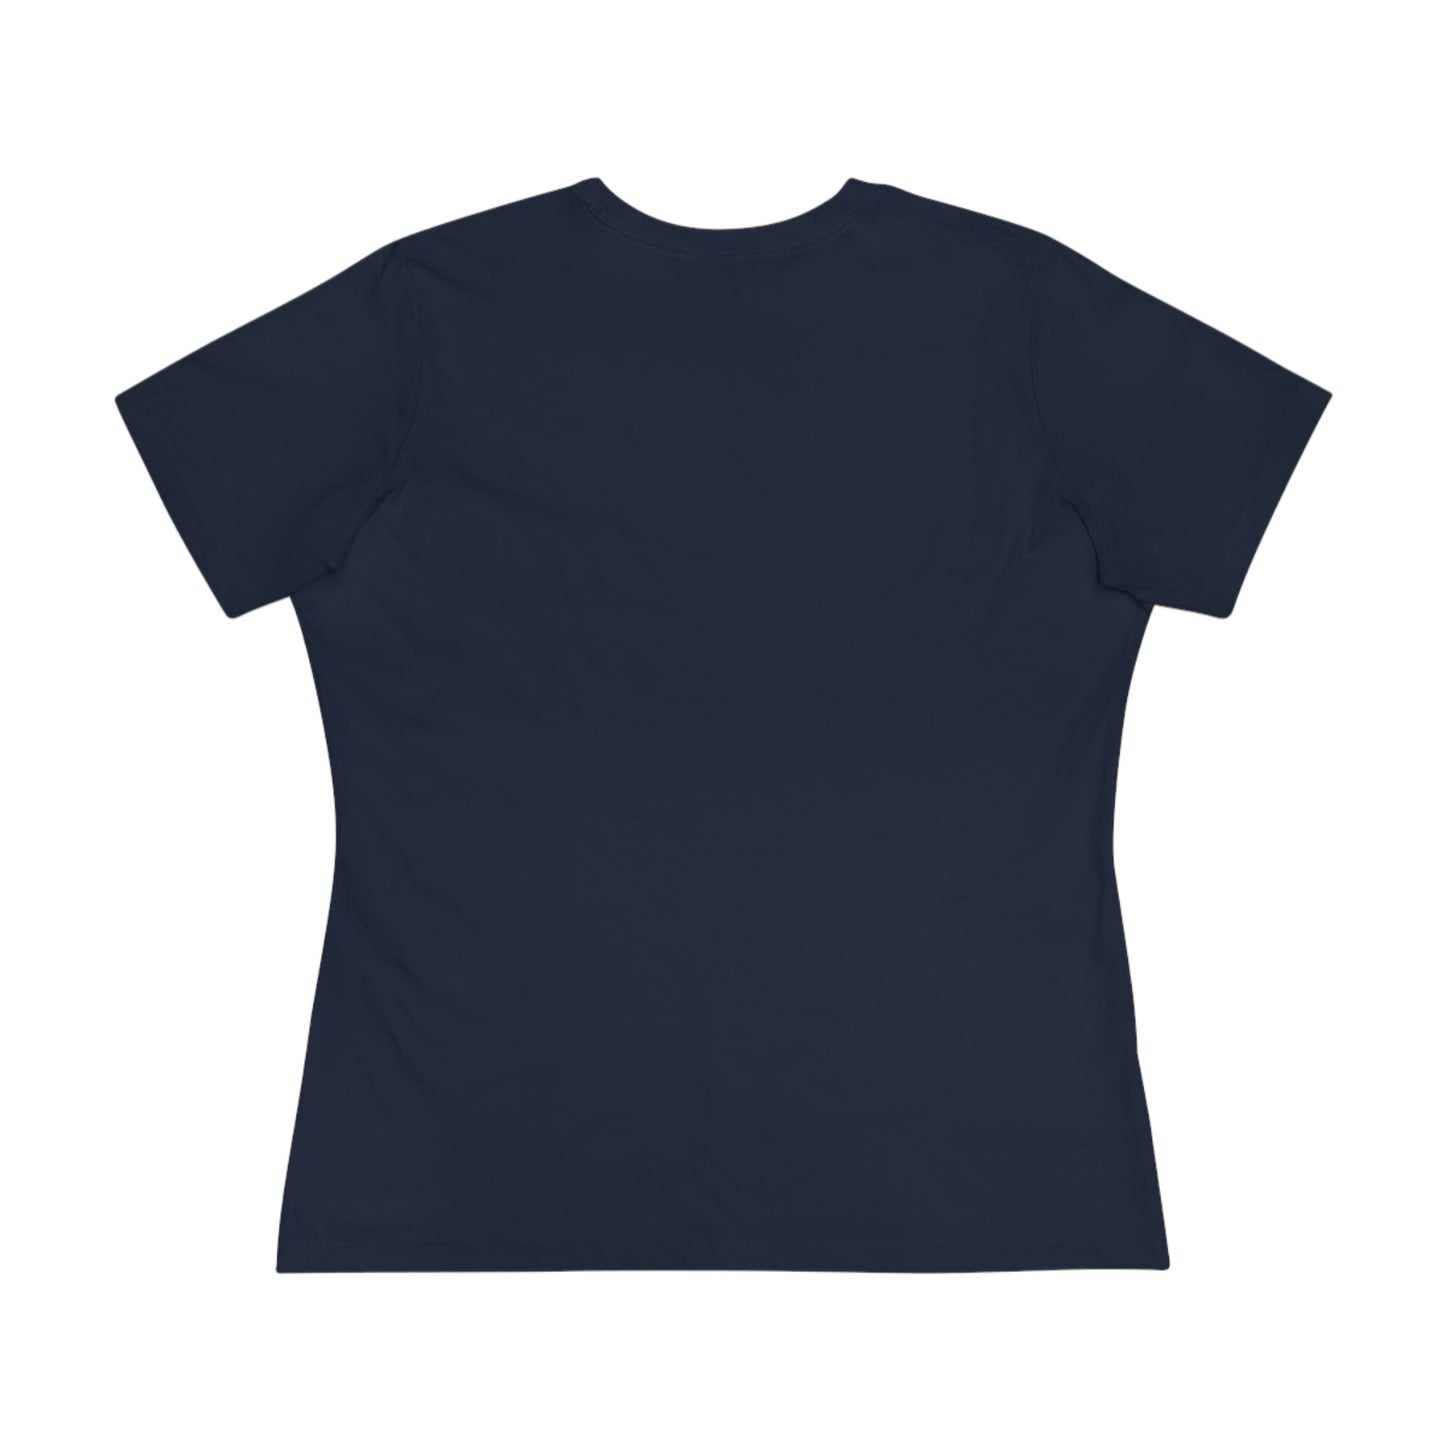 Flat back view of the Navy shirt